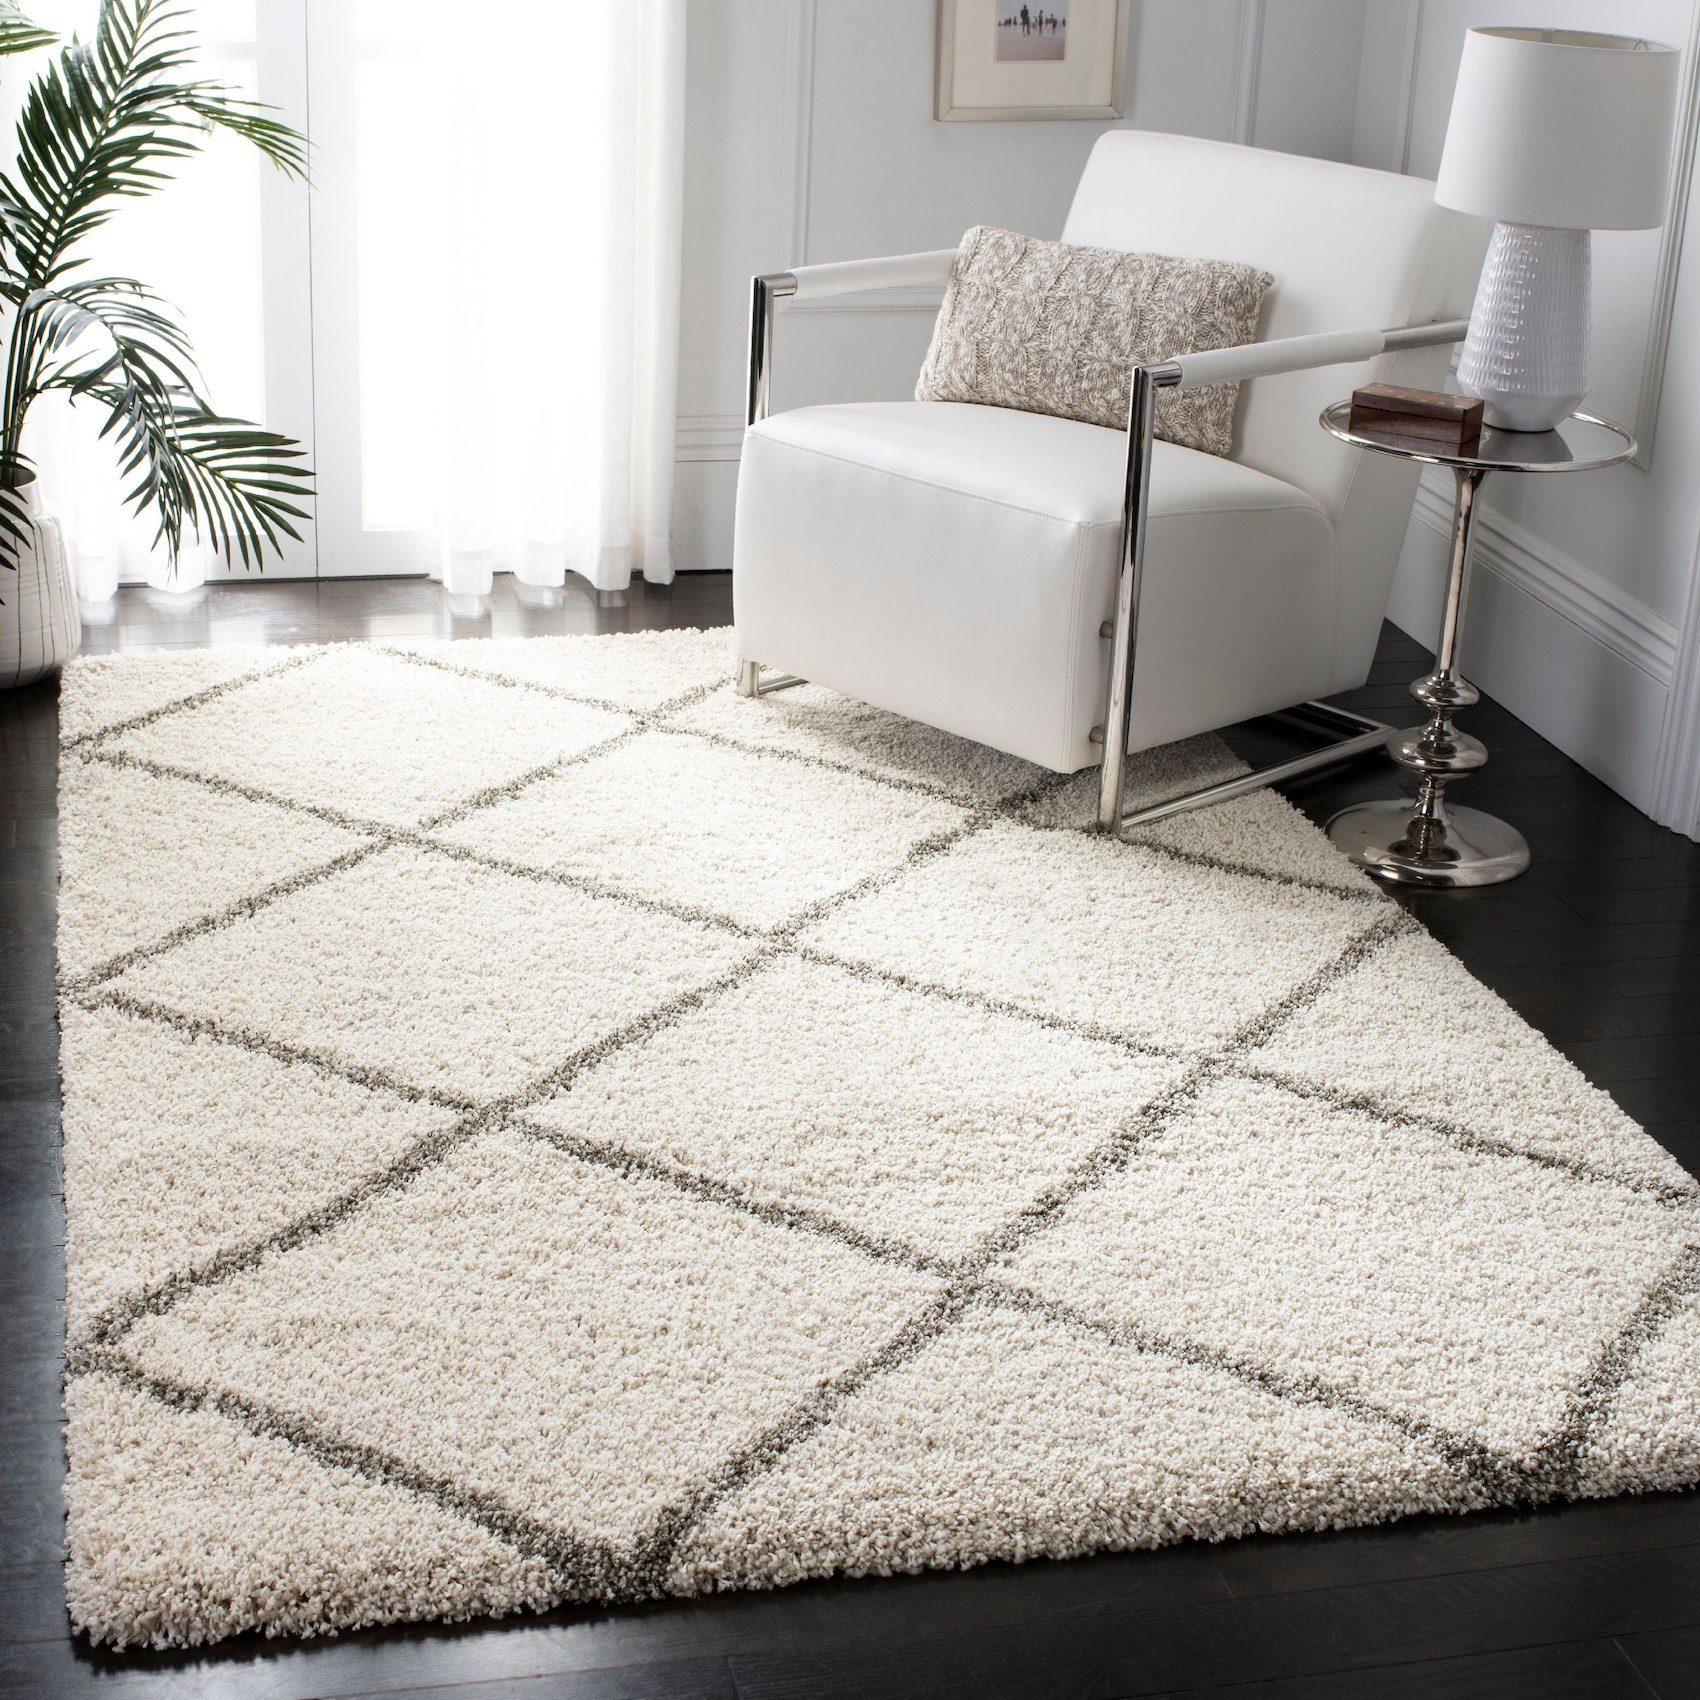 The rug in a living room with a triangular geometric pattern